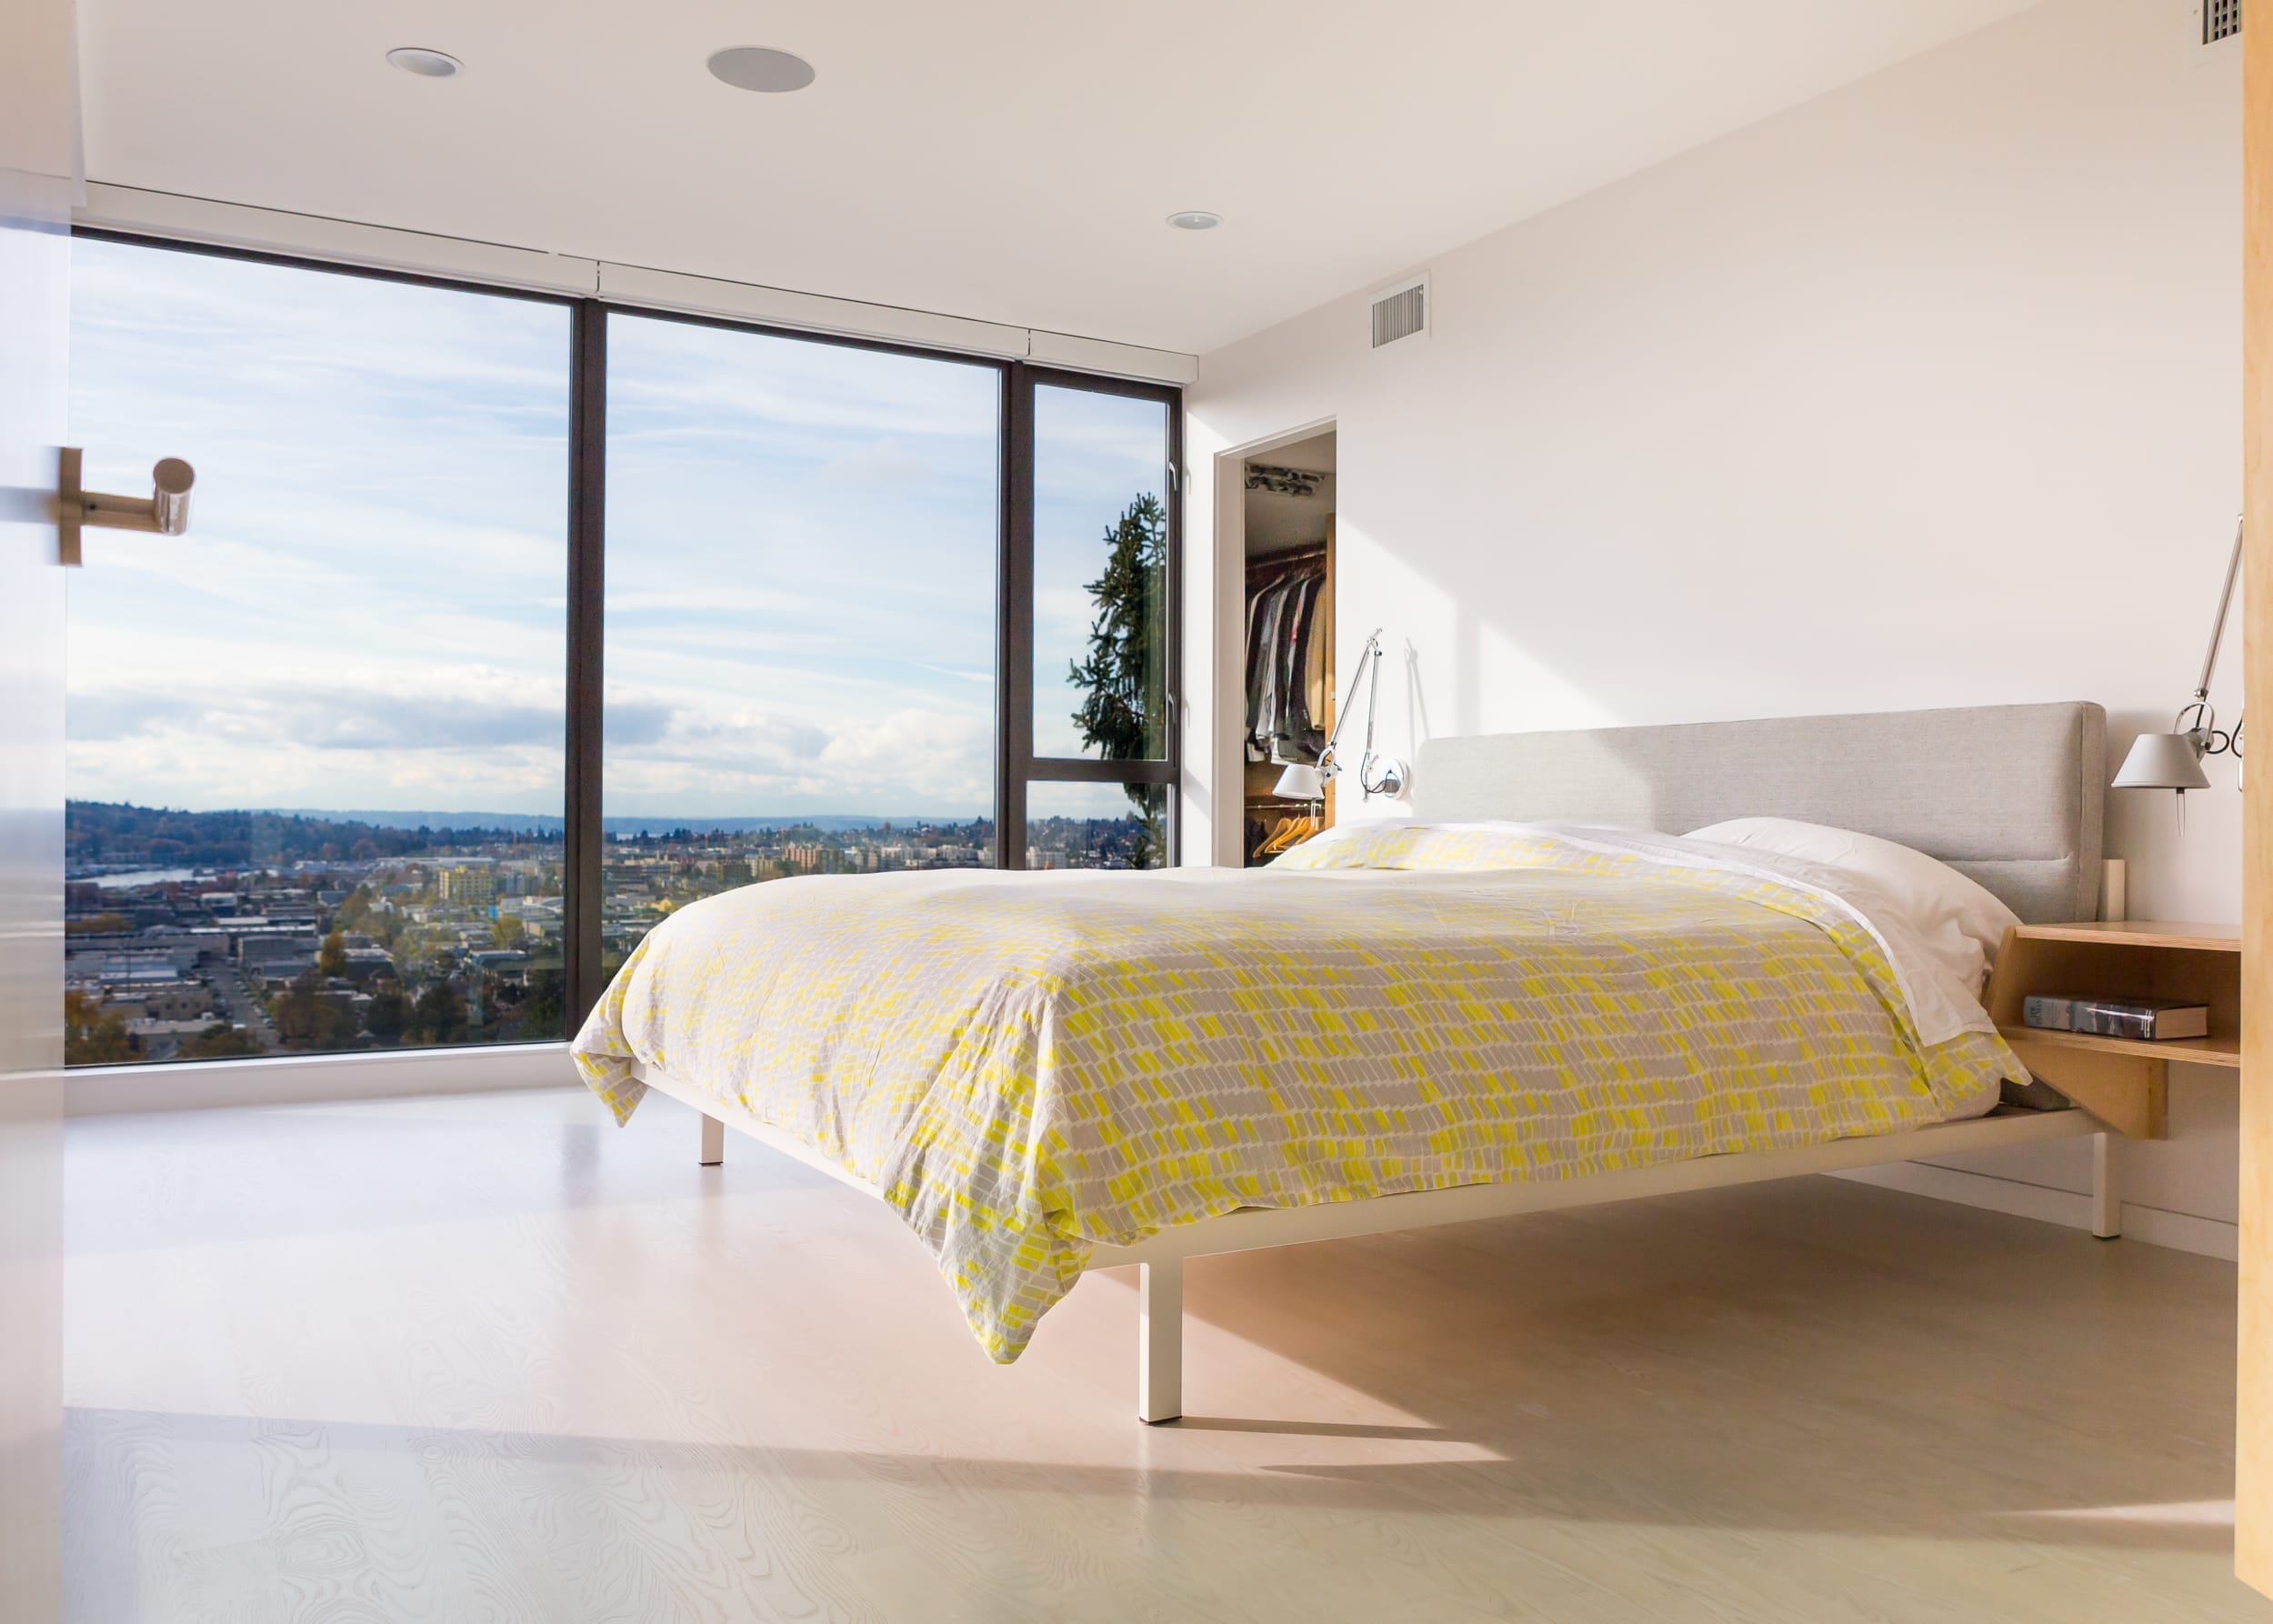 A bed in a bedroom with a view of the city.